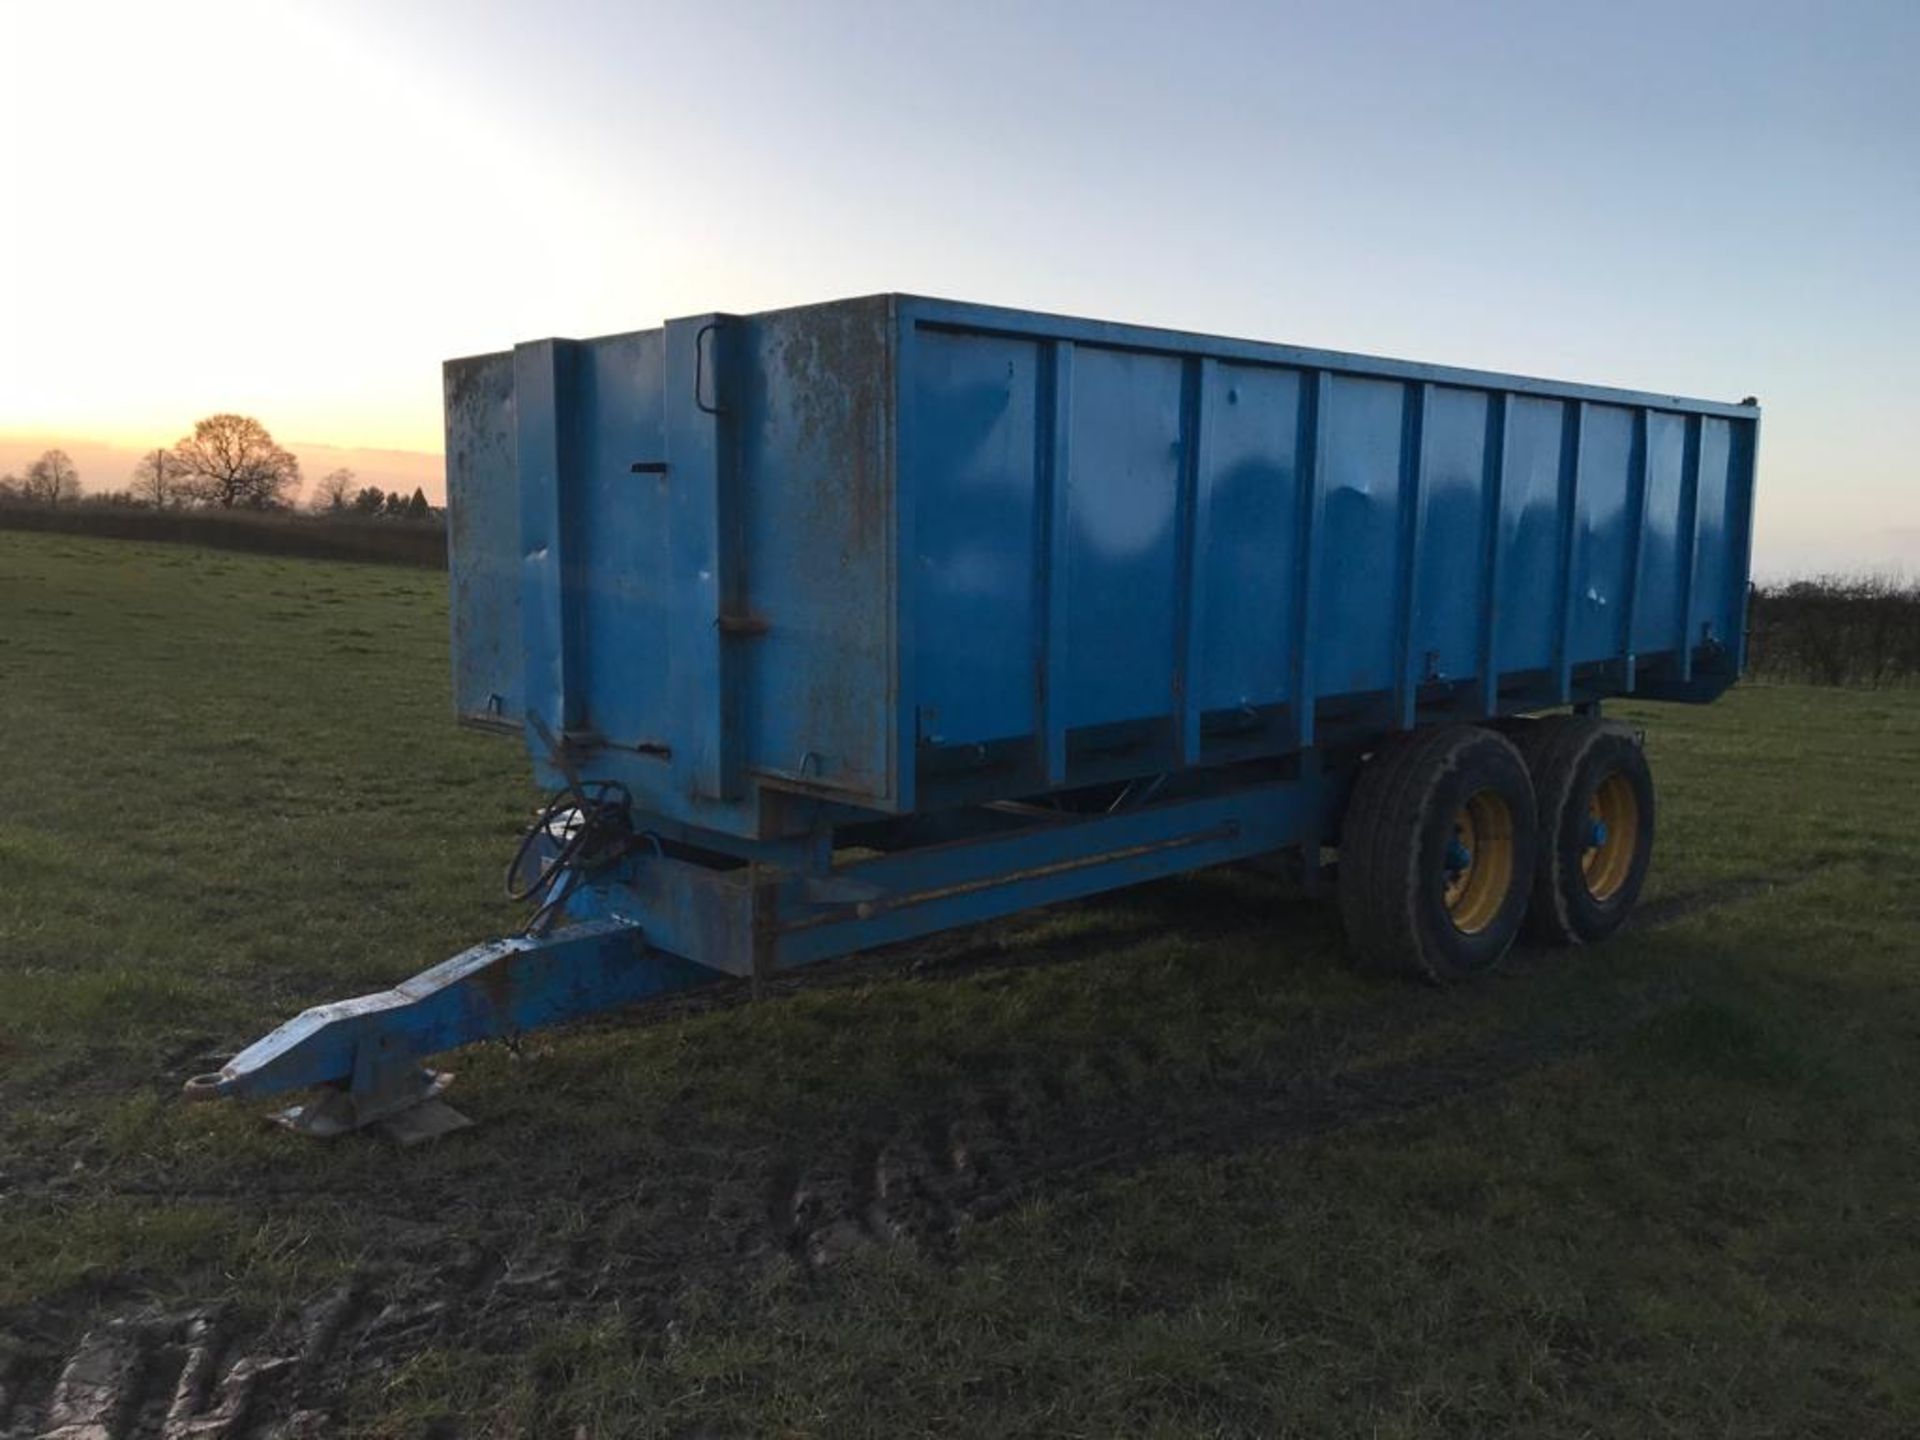 Easterby 10 Tonne Grain Trailer - Image 3 of 5